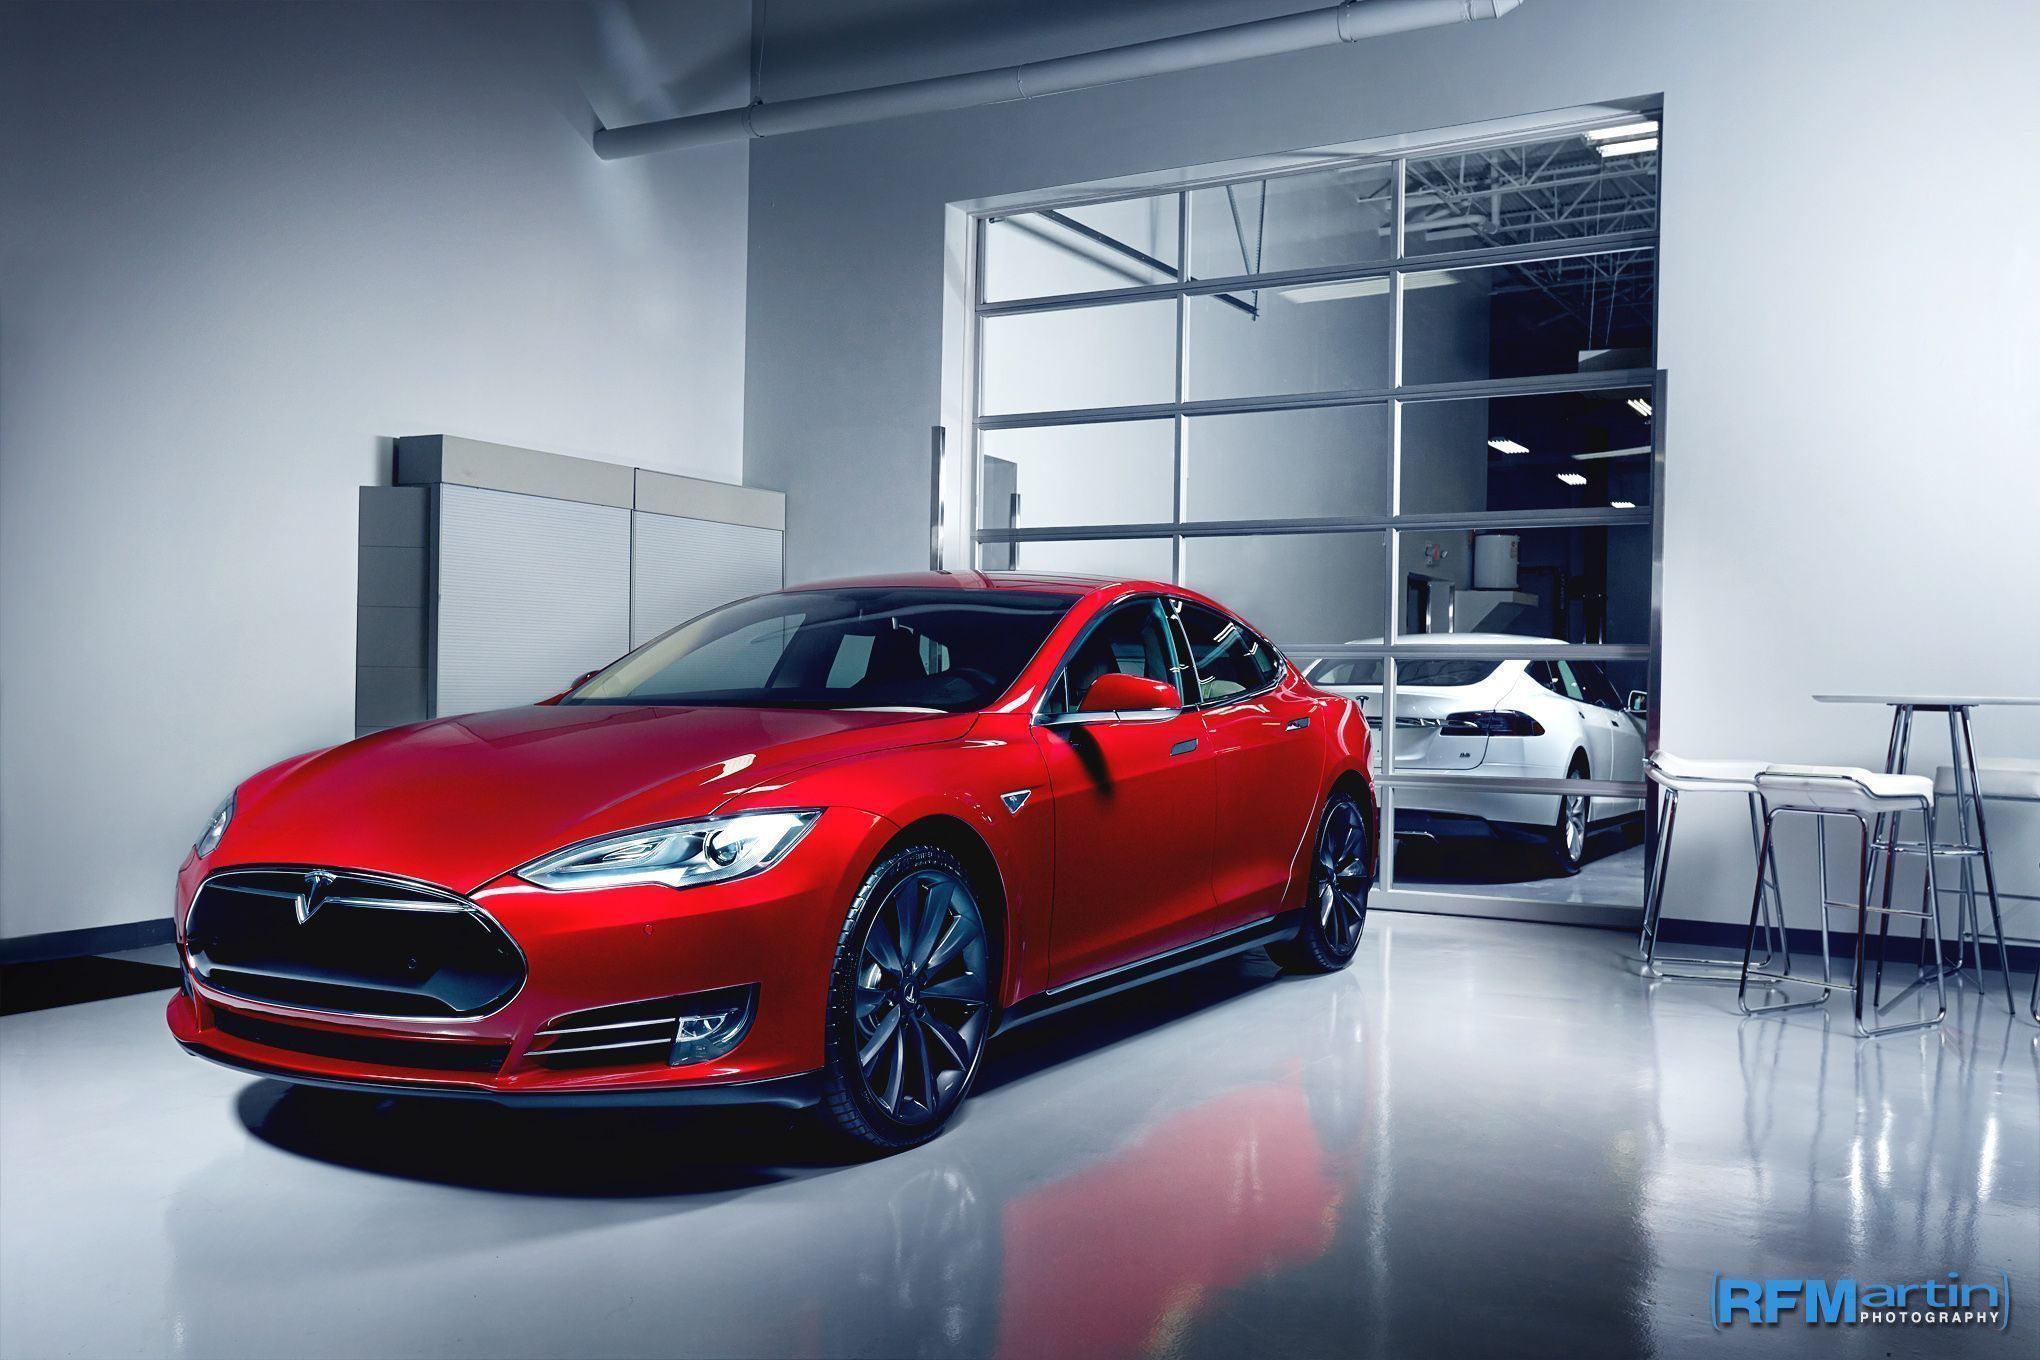 Your Ridiculously Awesome Tesla Model S Wallpaper Is Here